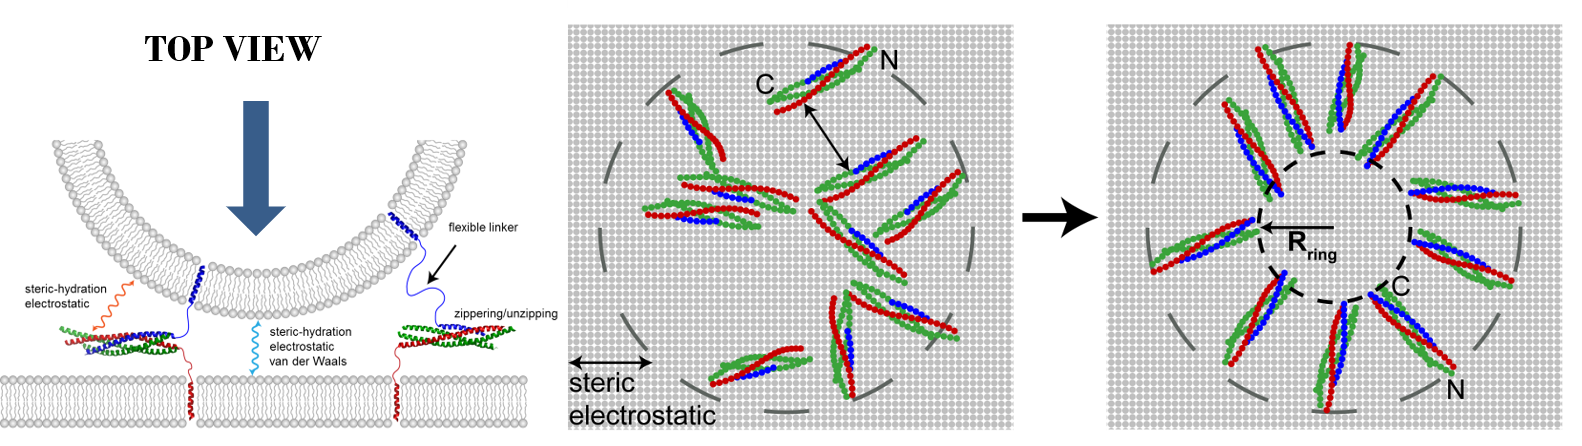 In simulations, SNARE complexes self-organize into circular clusters that exert entropic forces that push membranes together and catalyze their fusion.